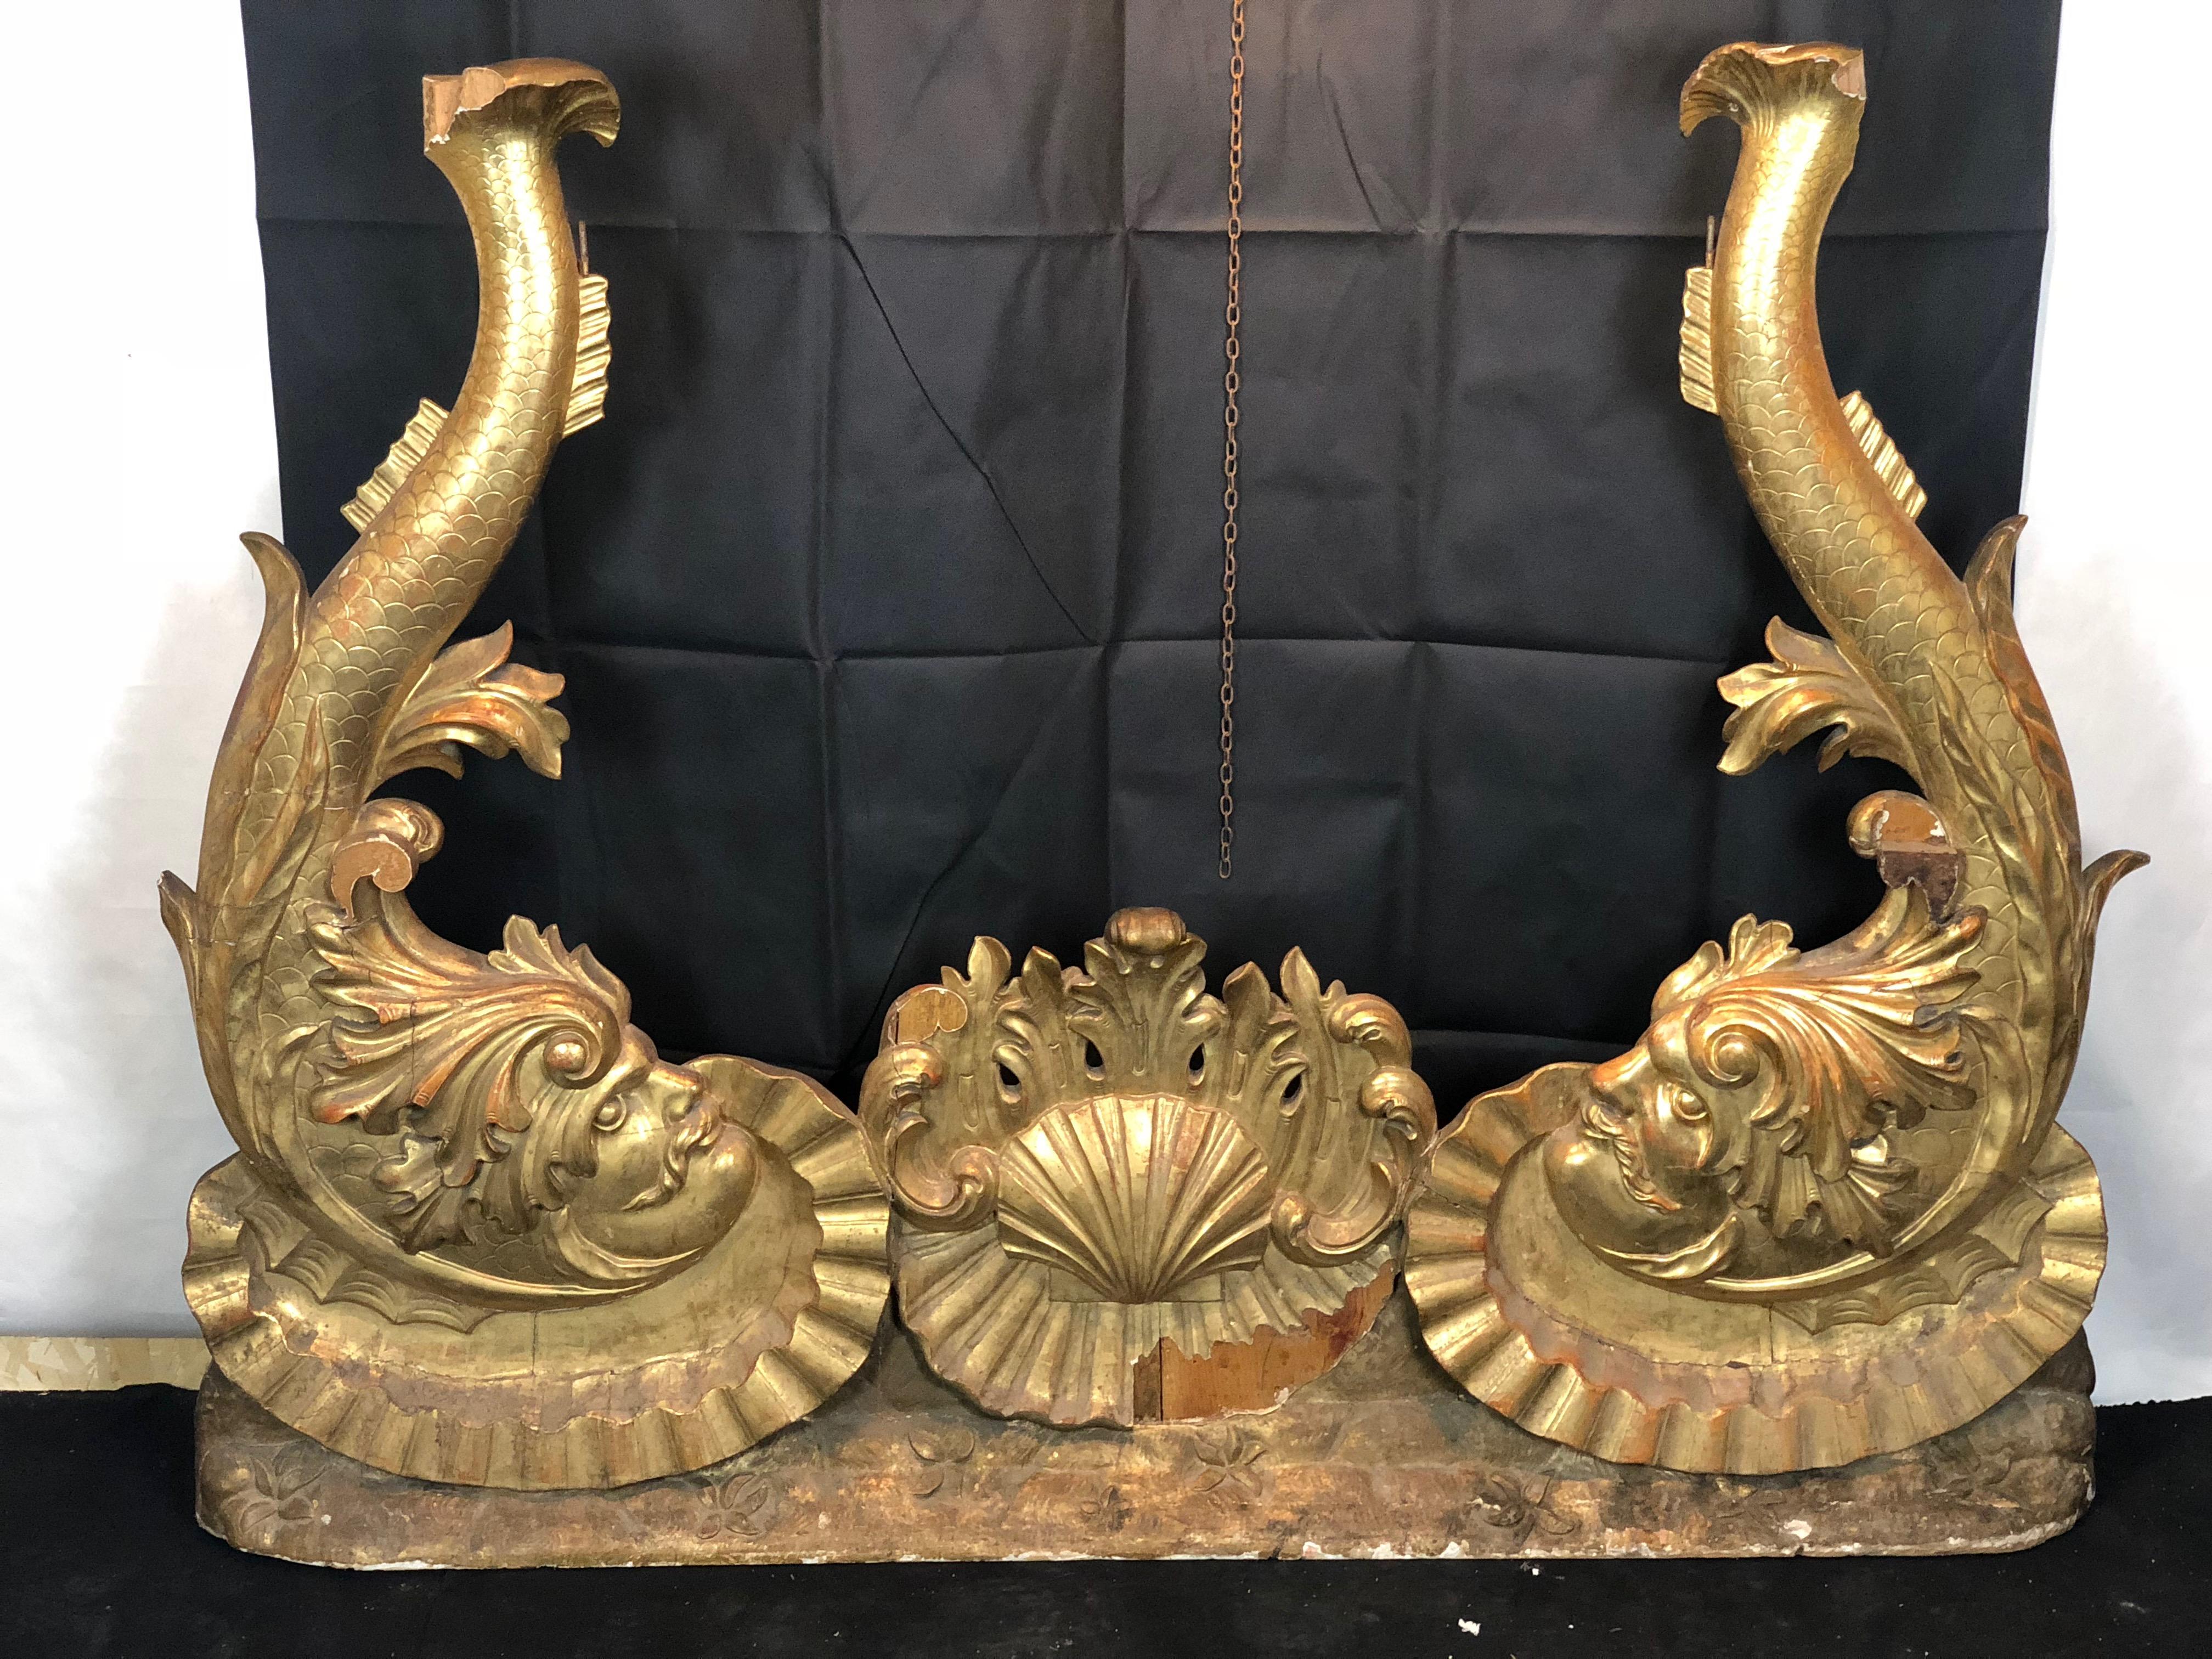 Hand-Crafted 19th Century a Decorative 19th Giltwood Frieze, Venice For Sale